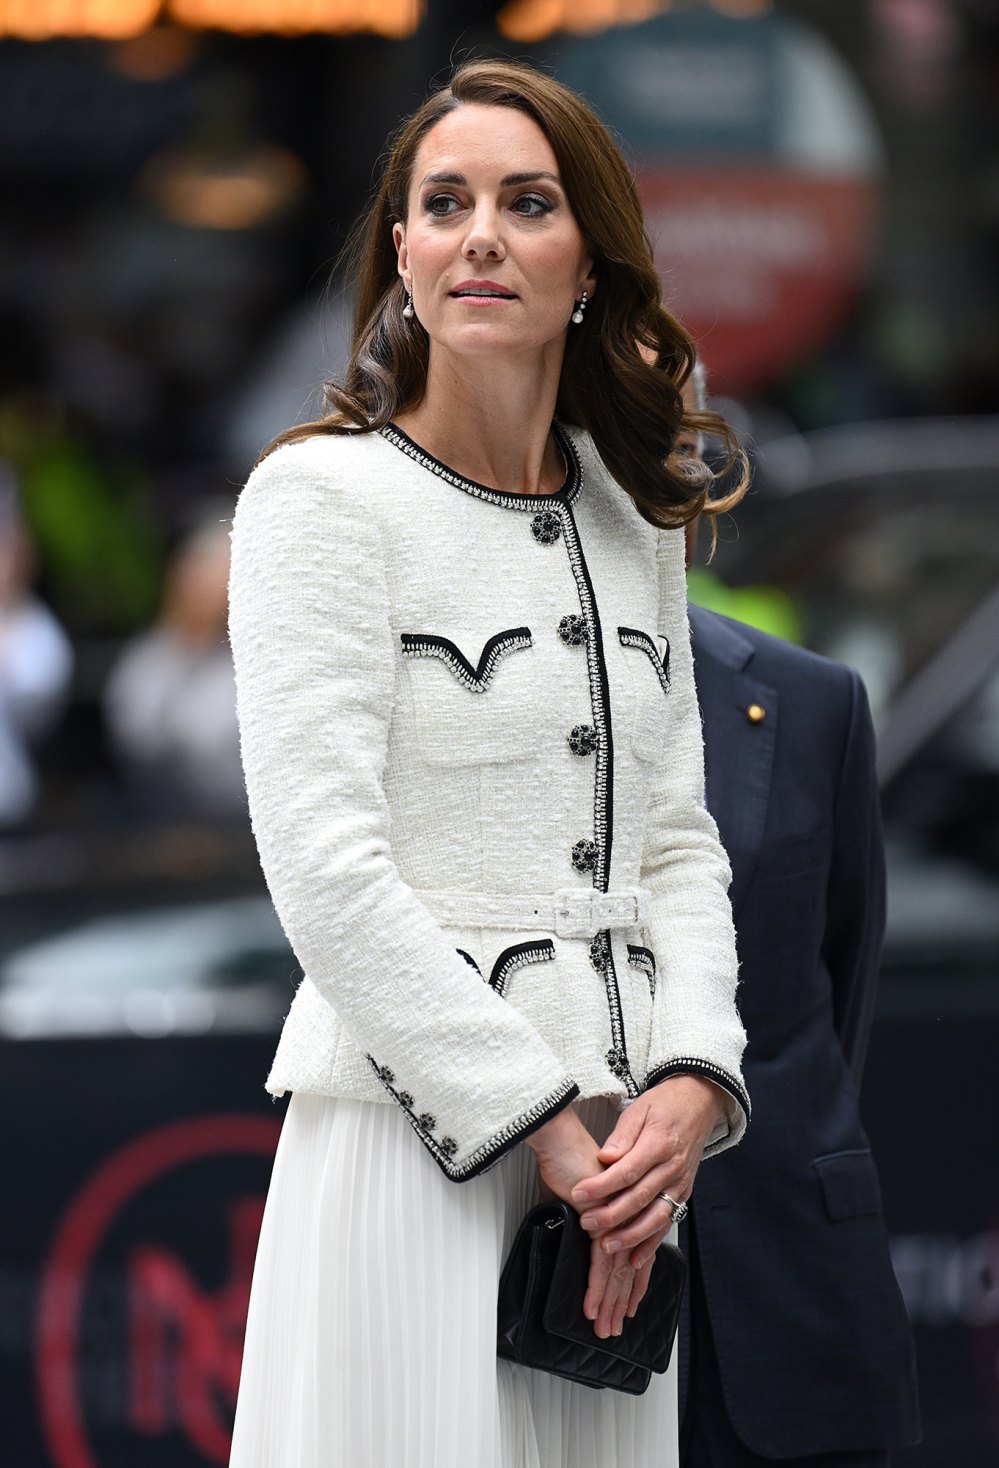 Kate Middleton Reportedly ‘Wrote Every Word’ of Cancer Announcement Speech, Friend Says